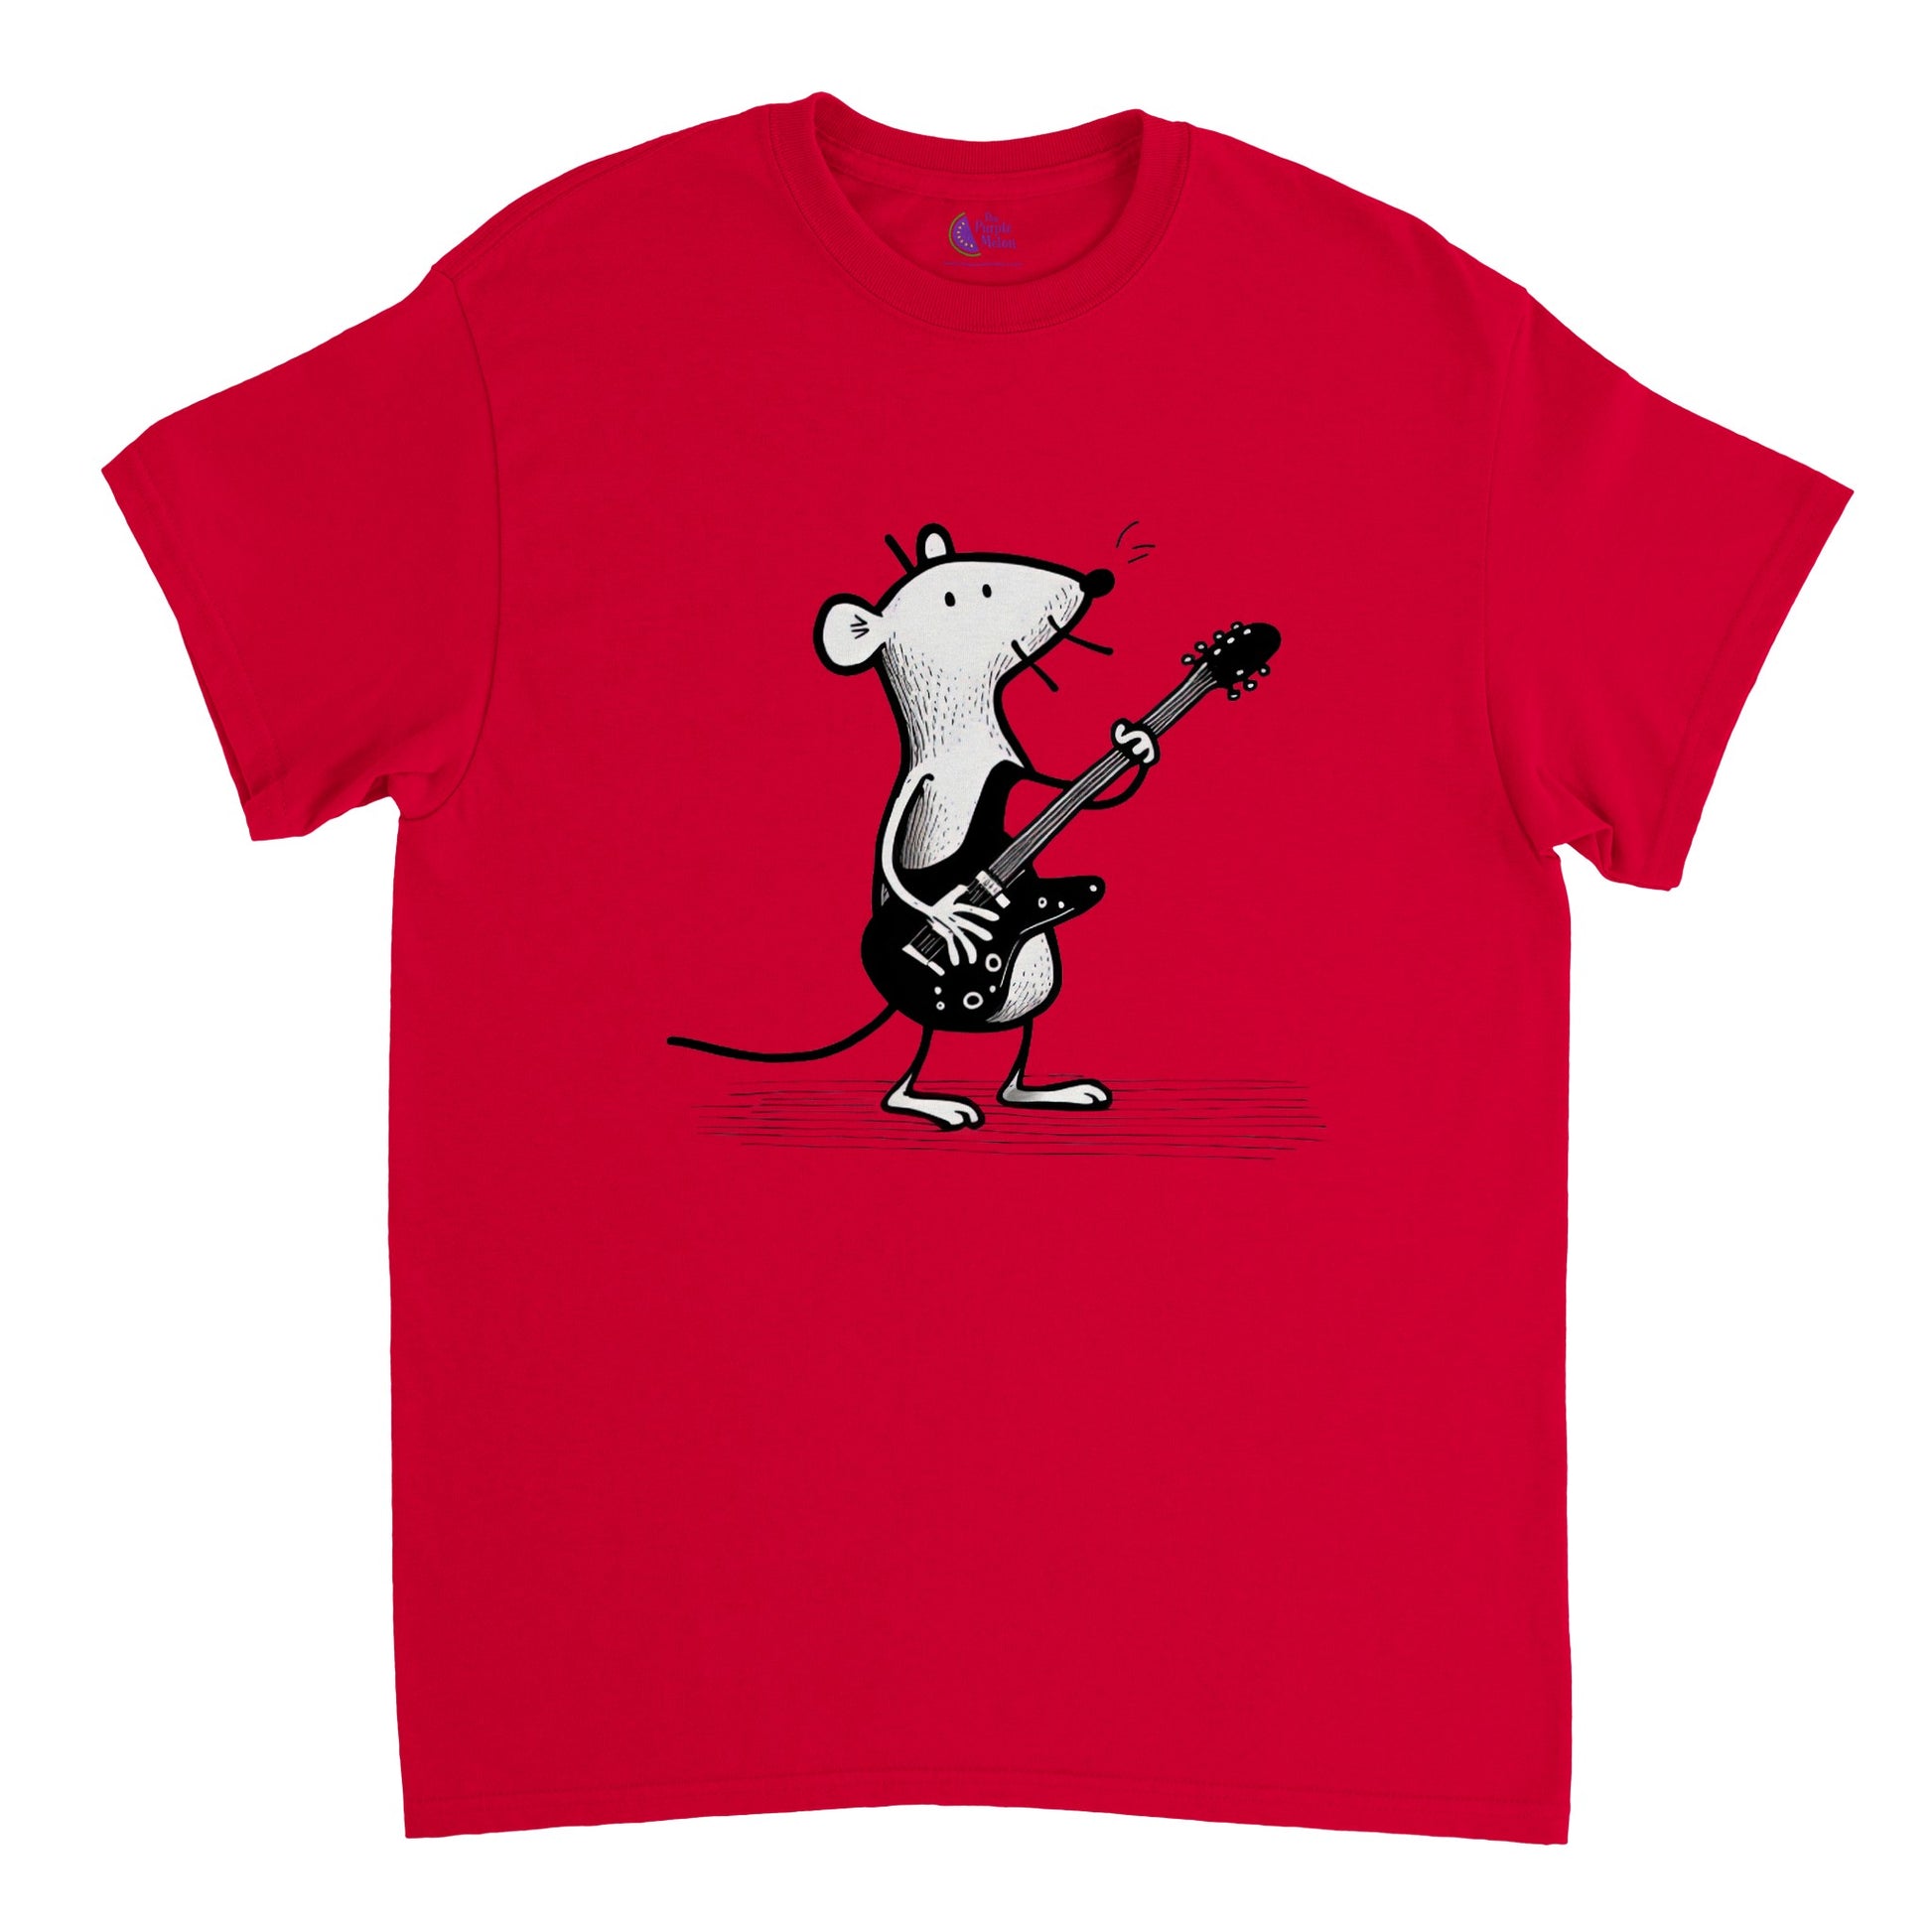 Red t-shirt with a mouse playing guitar print